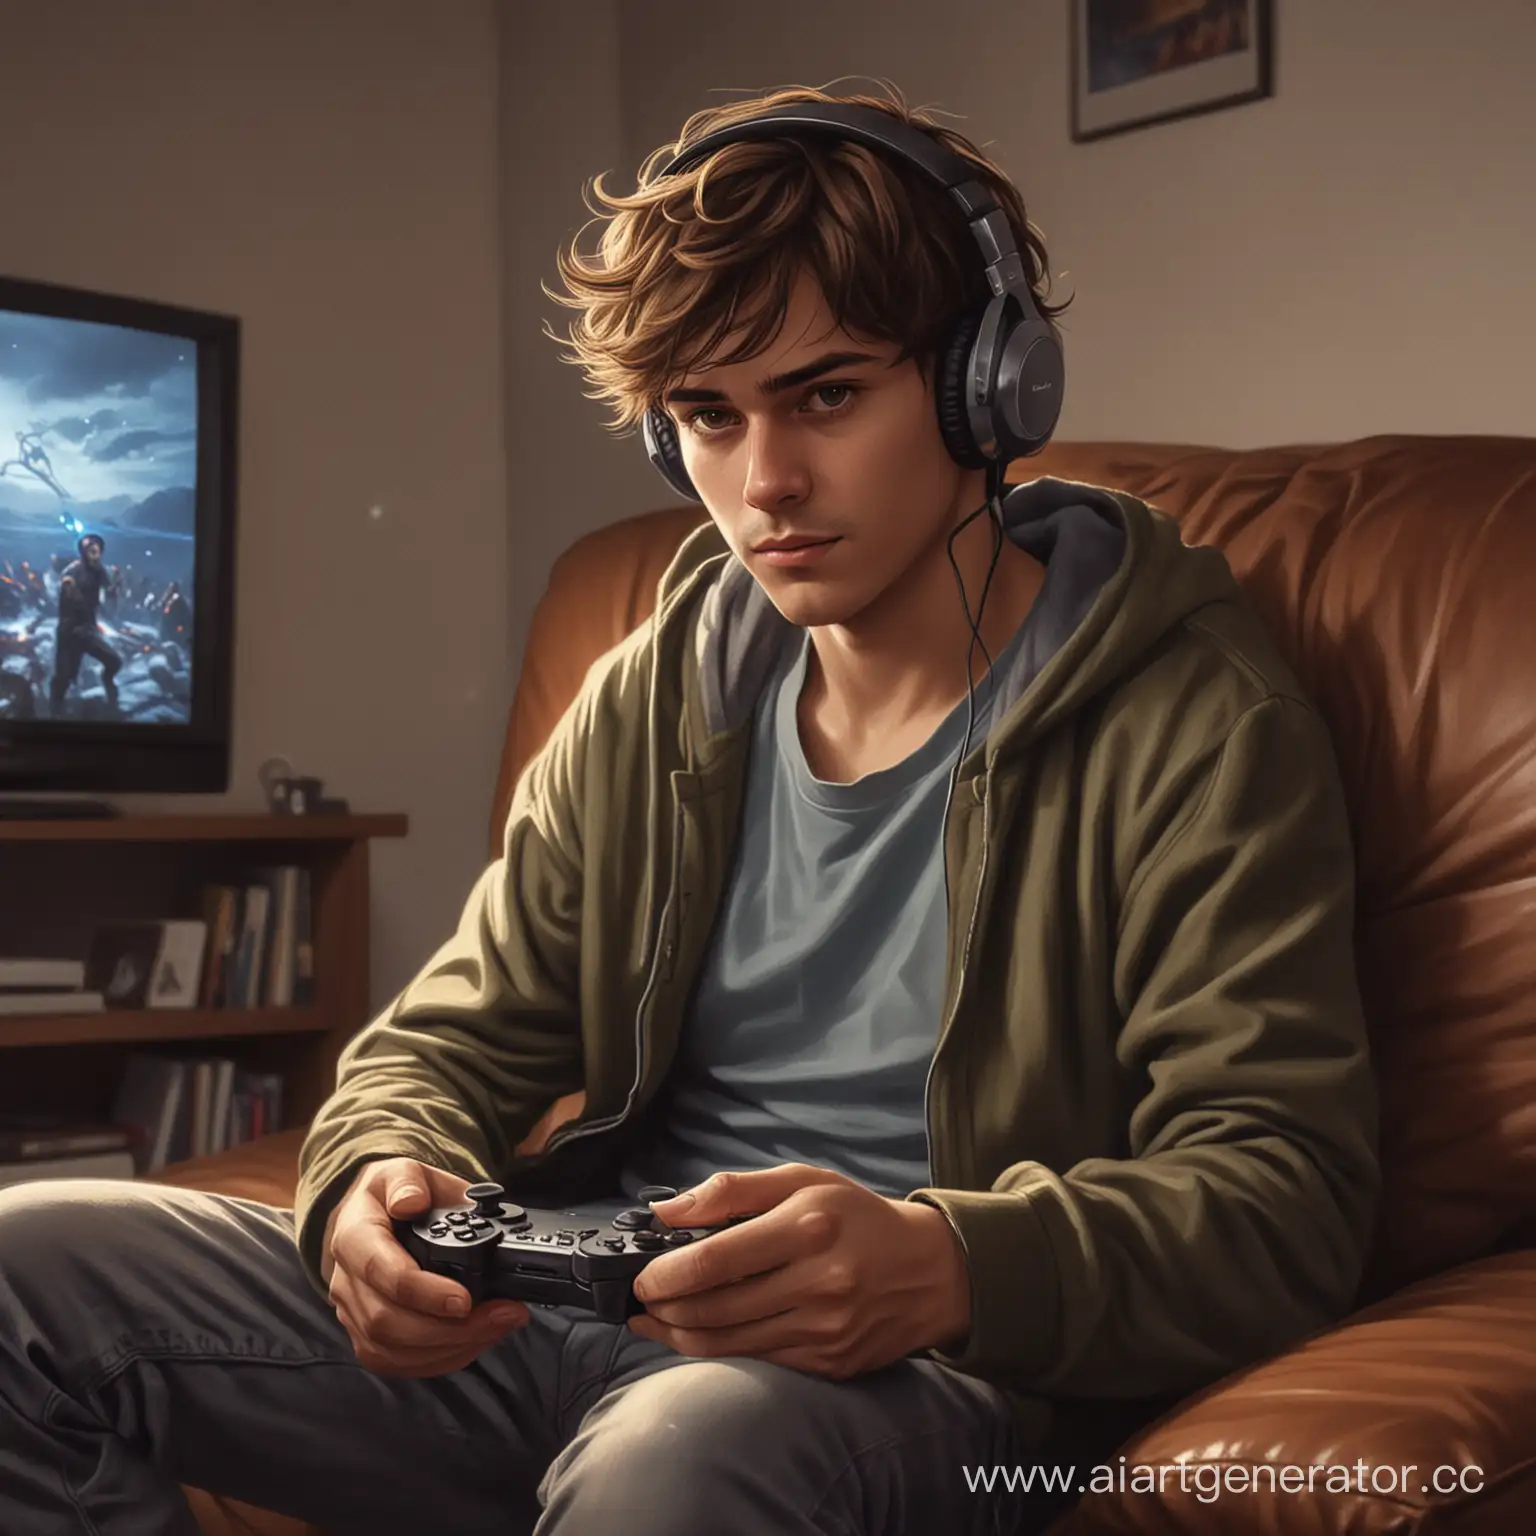 Man-Playing-Video-Games-on-Couch-in-Dark-Room-with-Headphones